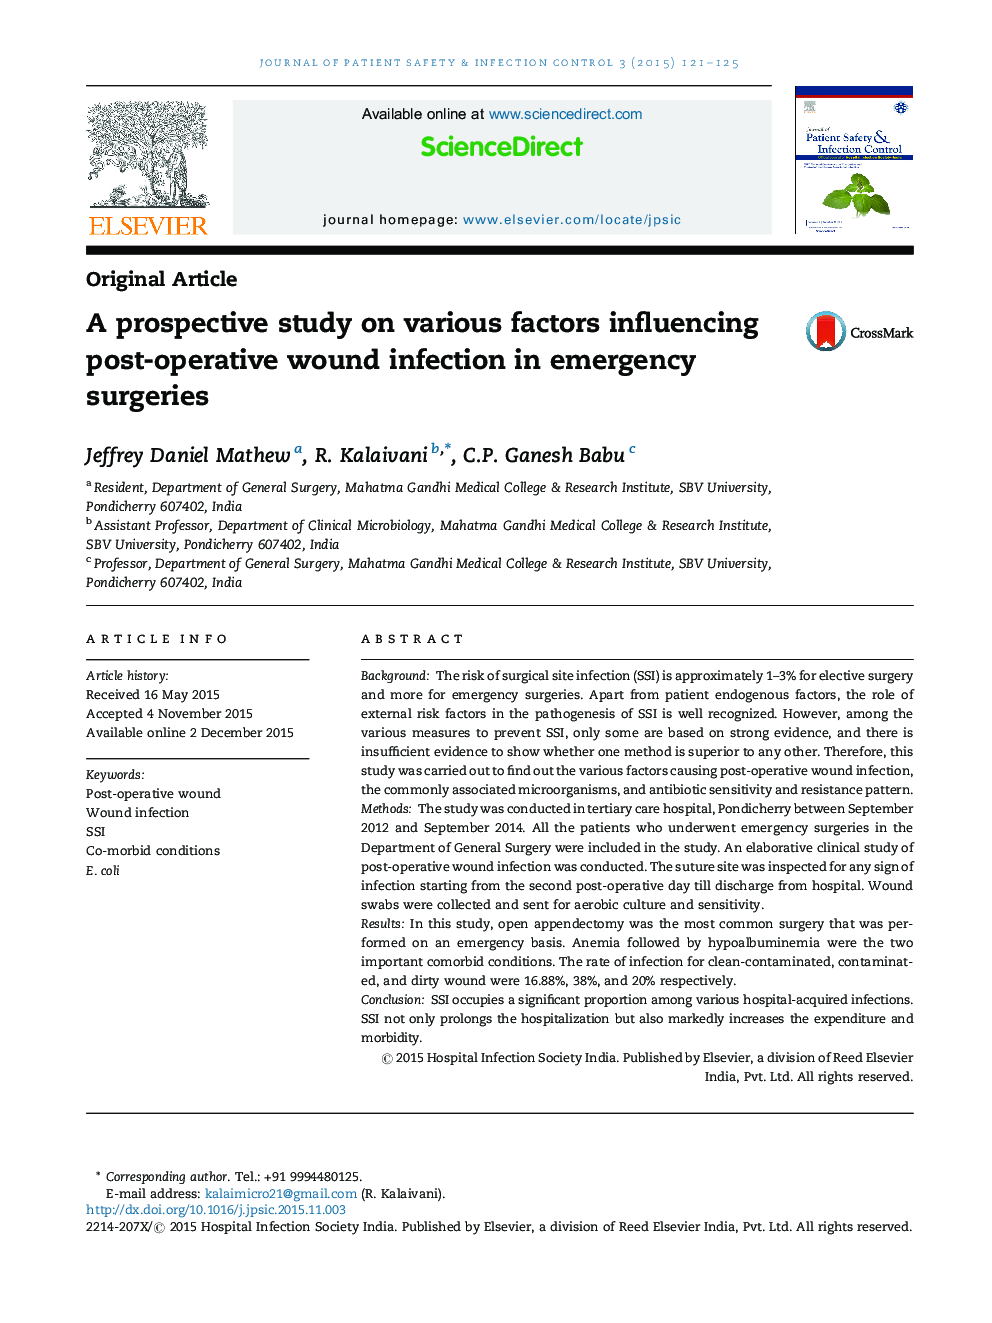 A prospective study on various factors influencing post-operative wound infection in emergency surgeries